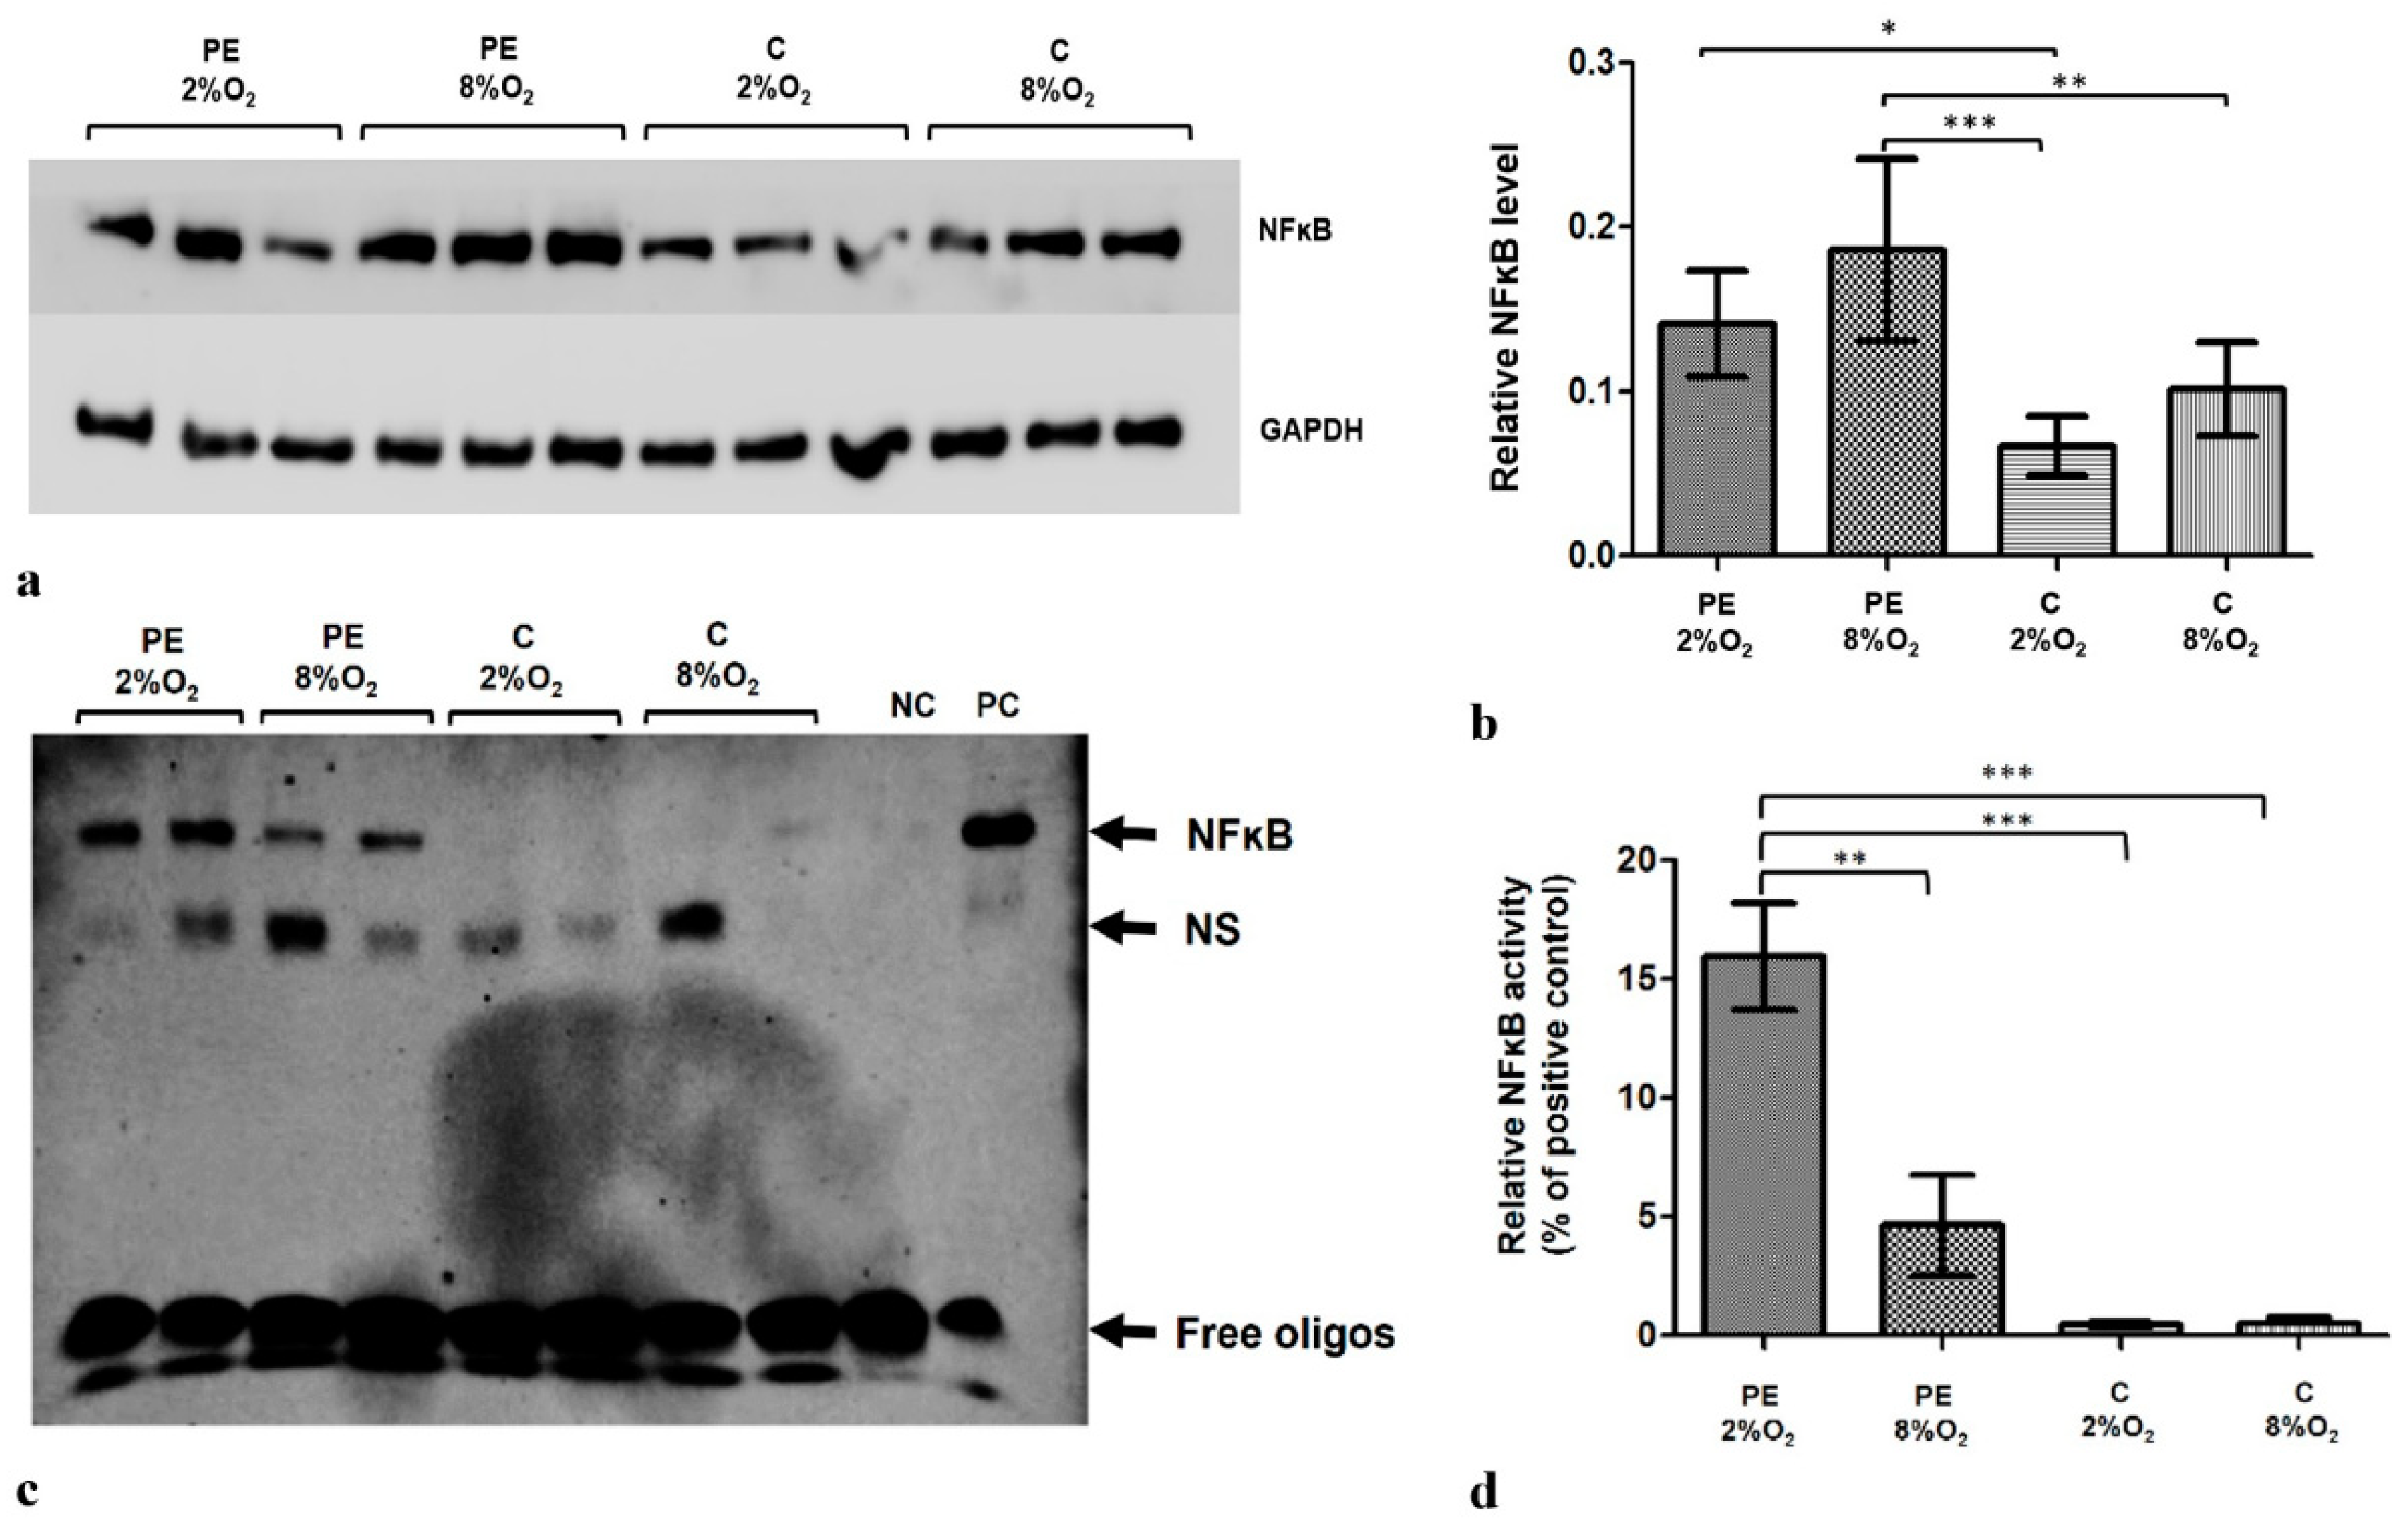 IJMS | Free Full-Text | The Preeclamptic Environment Promotes the  Activation of Transcription Factor Kappa B by P53/RSK1 Complex in a  HTR8/SVneo Trophoblastic Cell Line